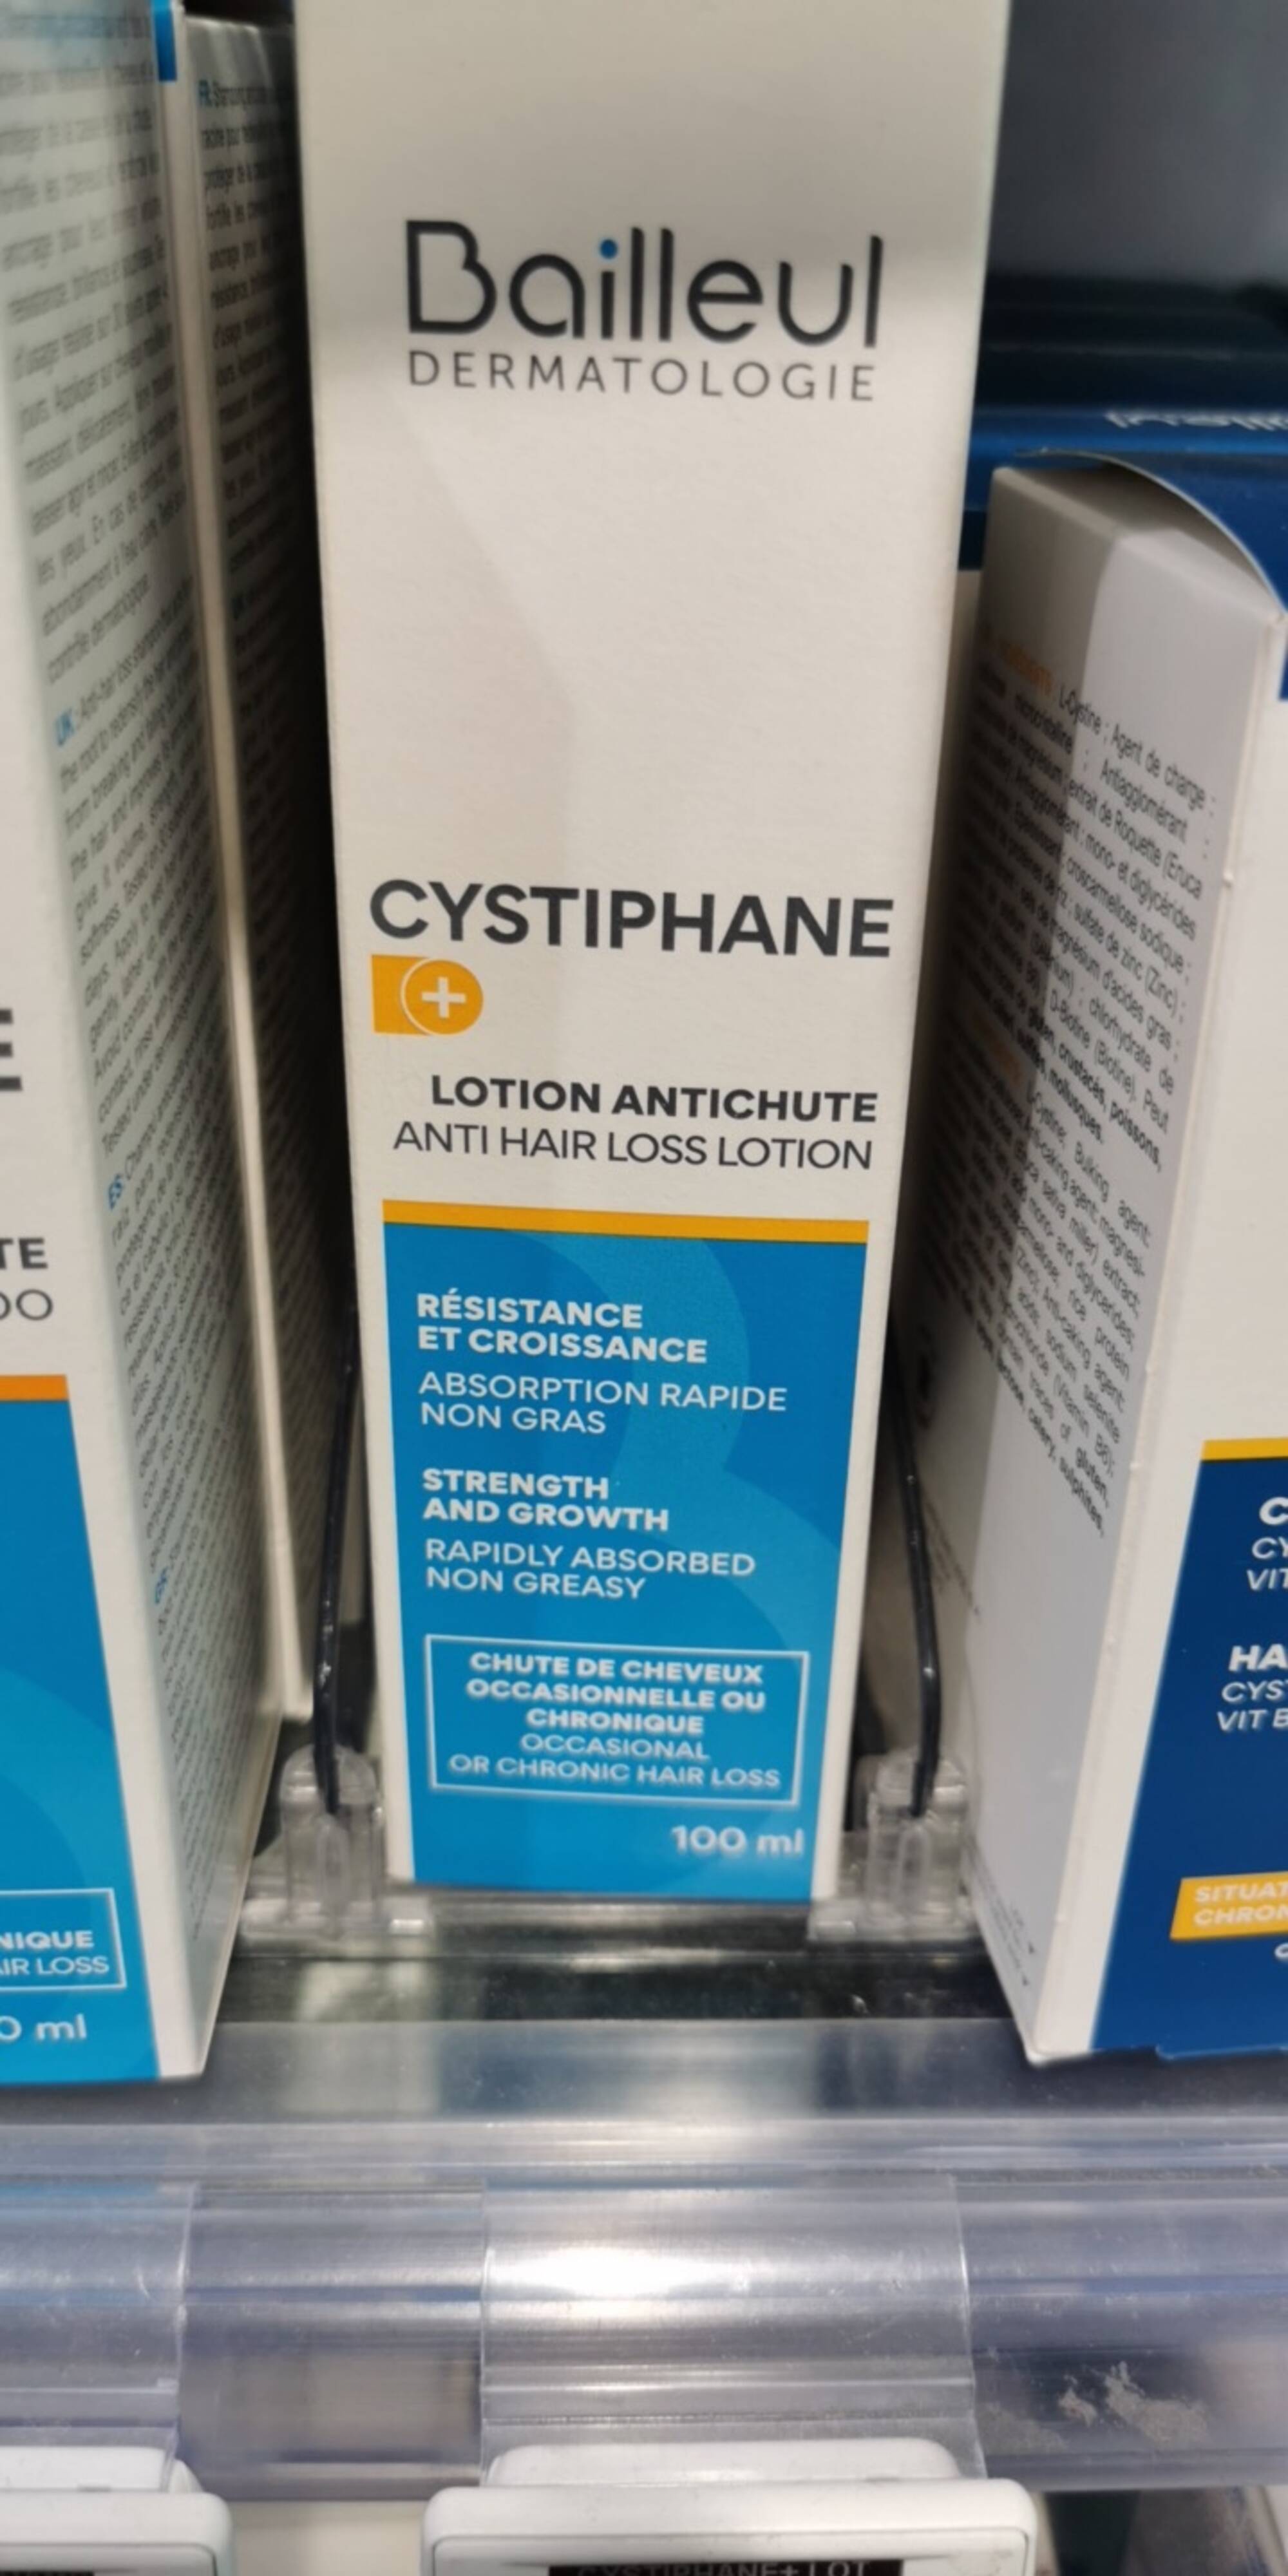 BAILLEUL - Cystiphane - Lotion antichute